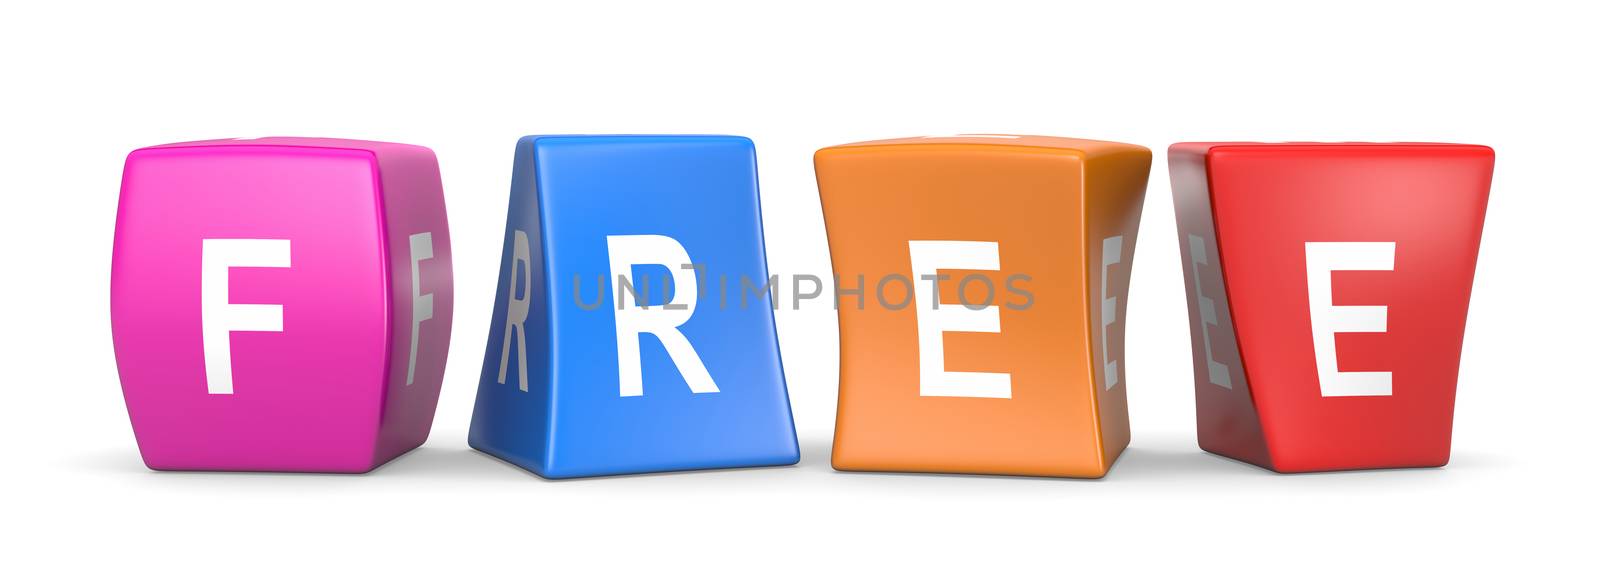 Free White Text on Colorful Deformed Funny Cubes 3D Illustration on White Background